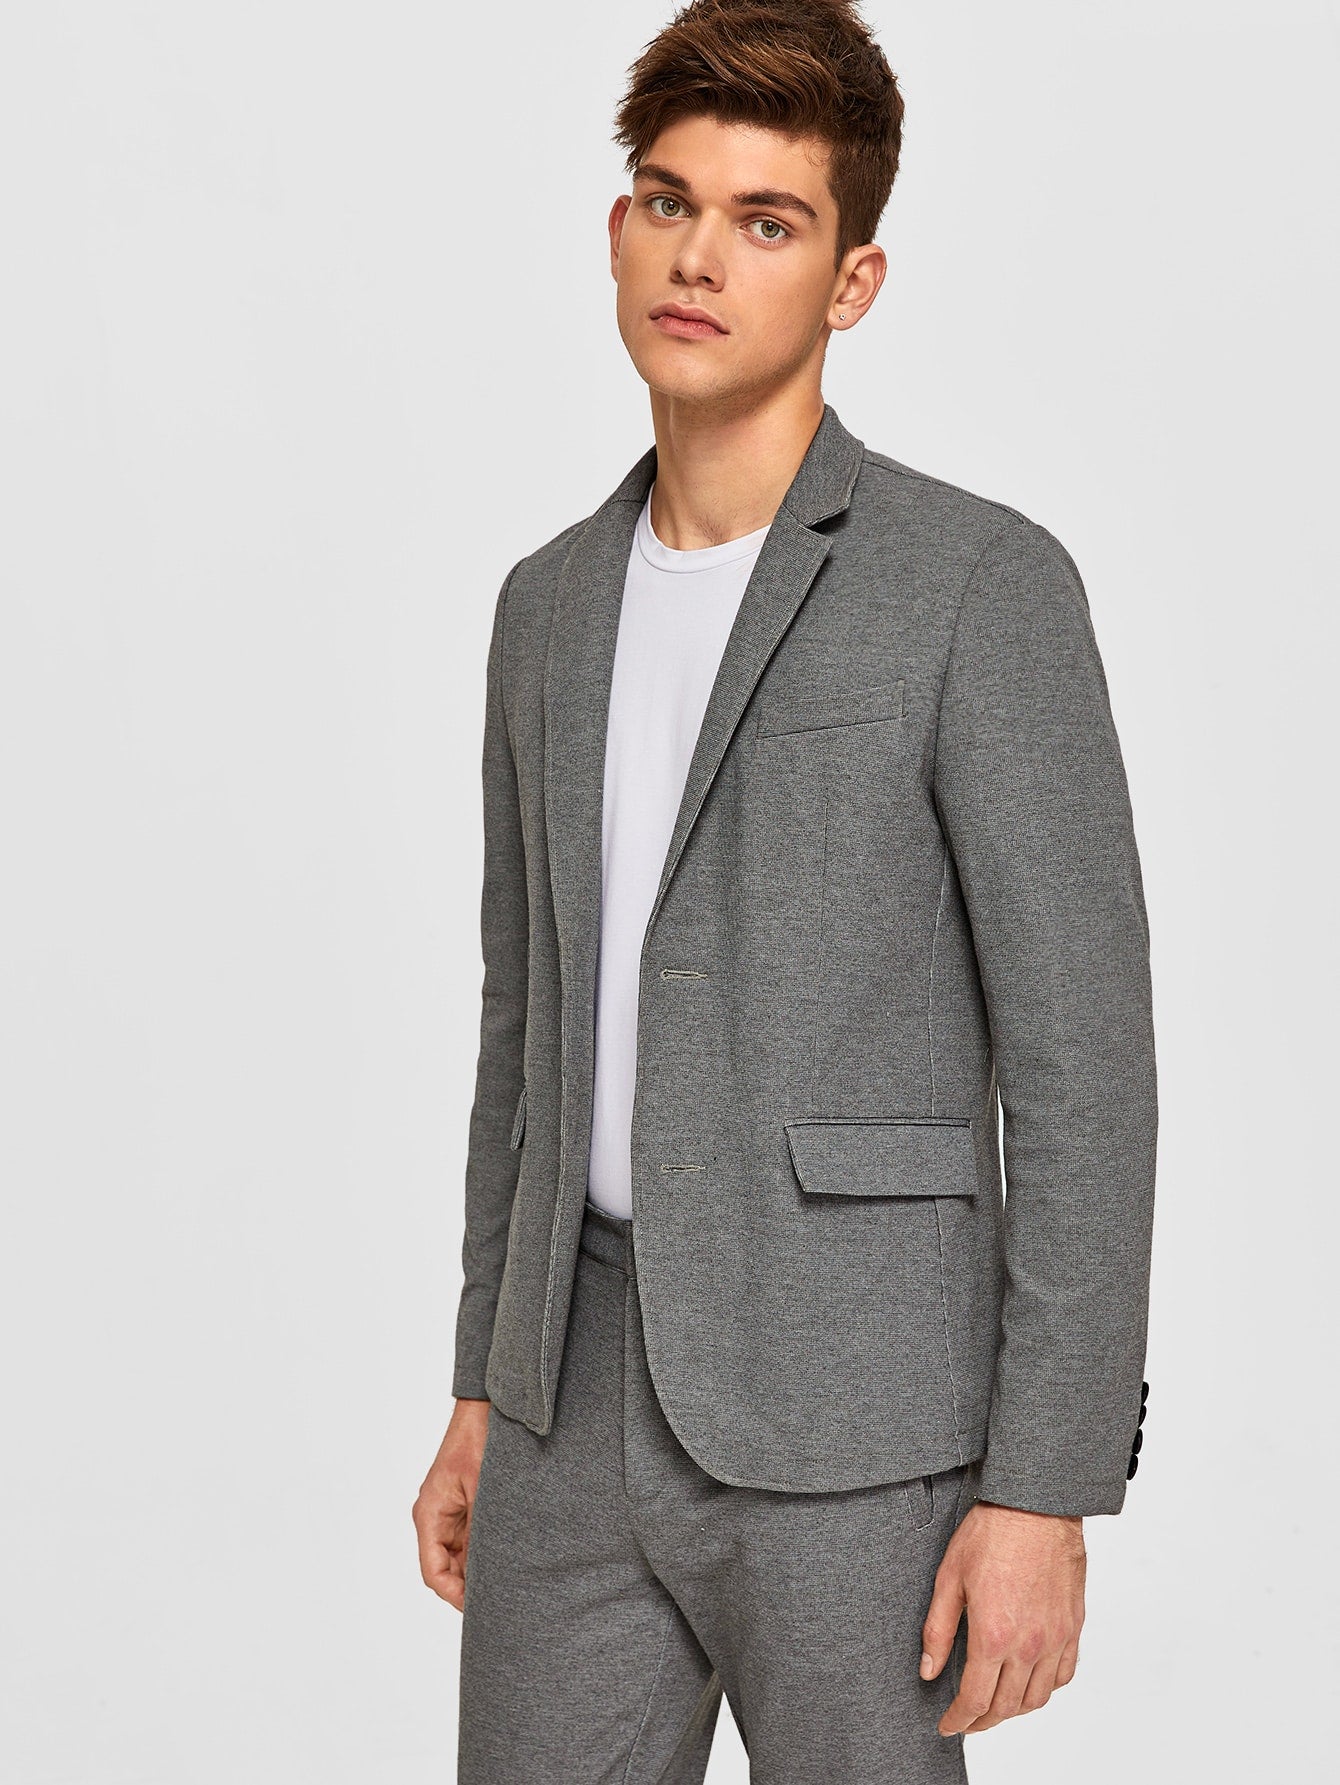 Men Notched Collar Buttoned Front Heather Gray Blazer